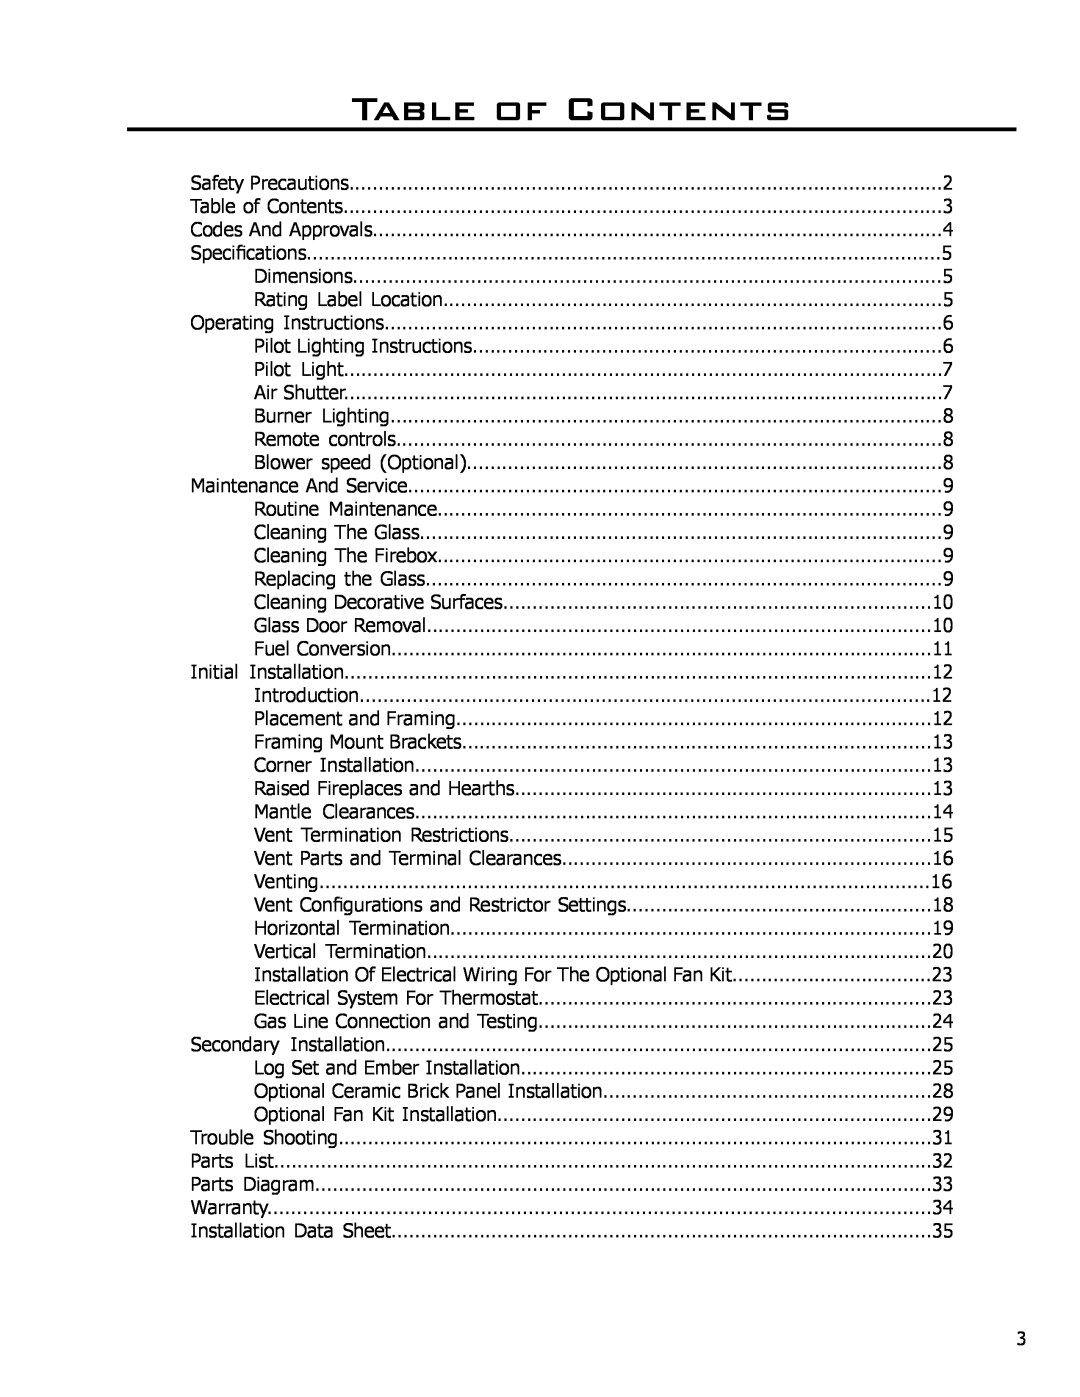 Enviro 50-927, C-10791 owner manual Table of Contents 